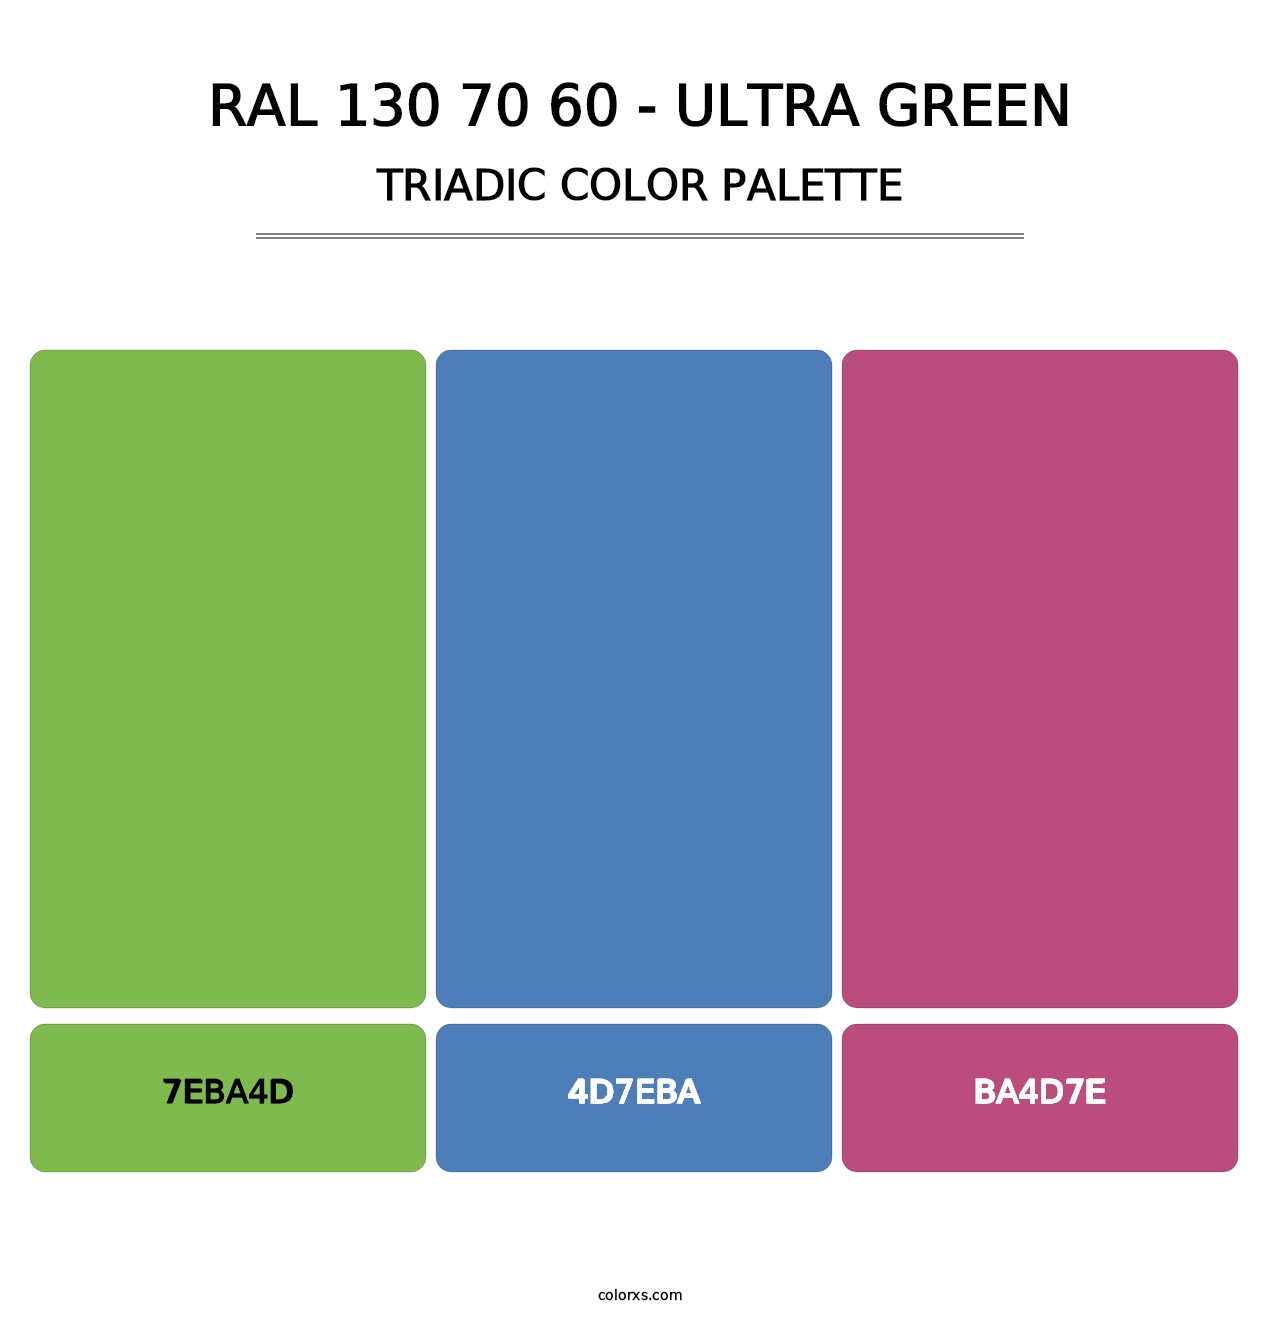 RAL 130 70 60 - Ultra Green - Triadic Color Palette